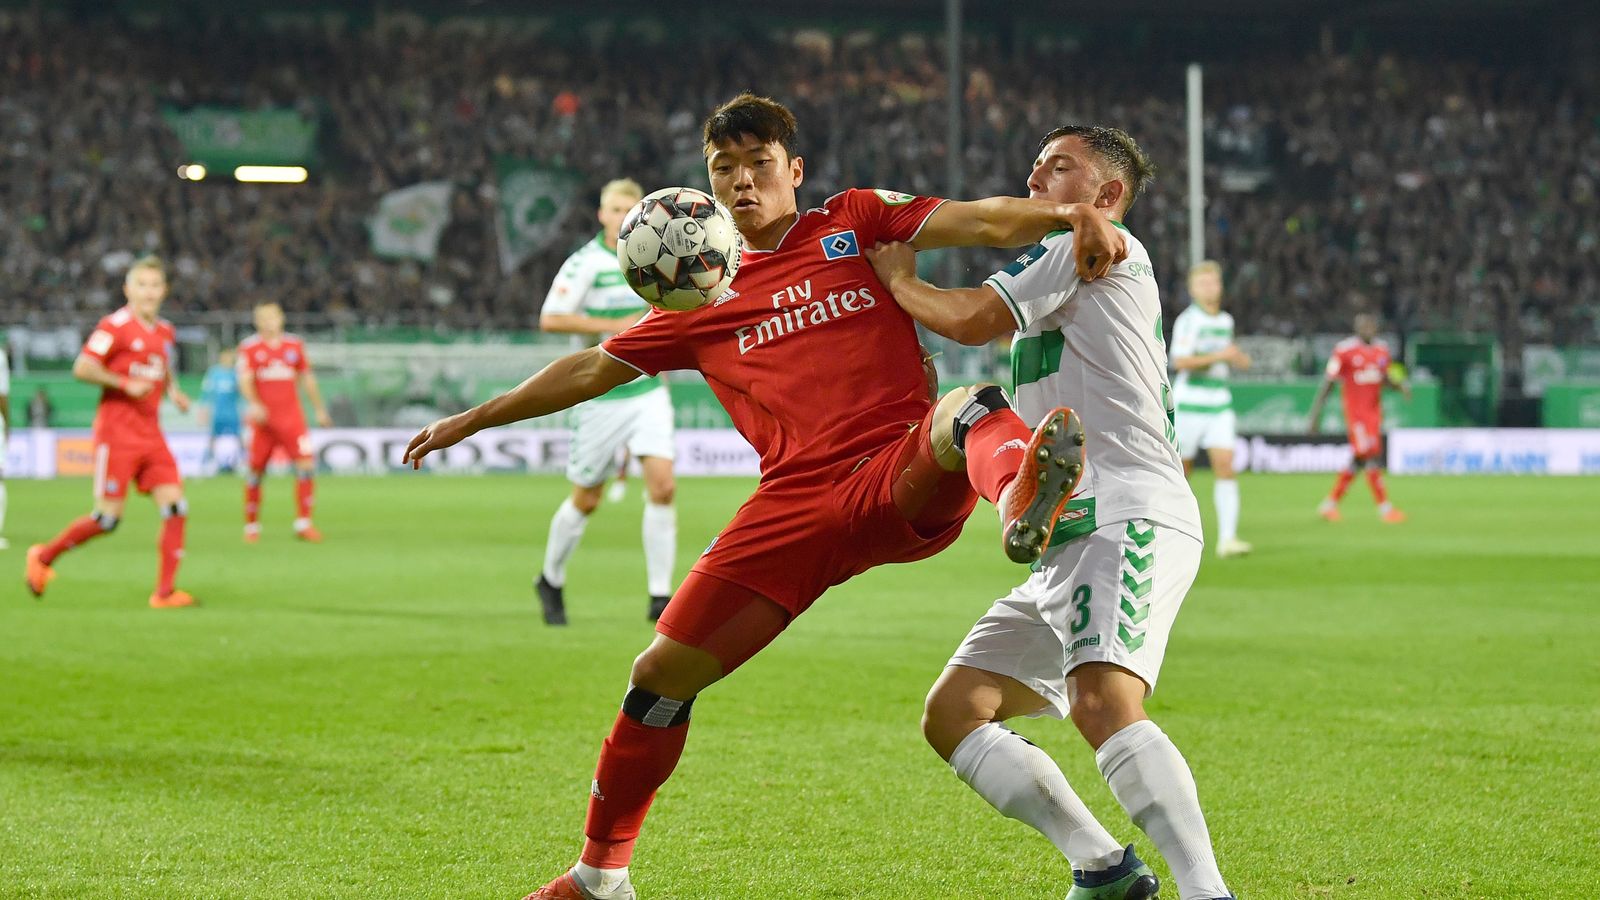 Hsv Gegen Greuther FГјrth